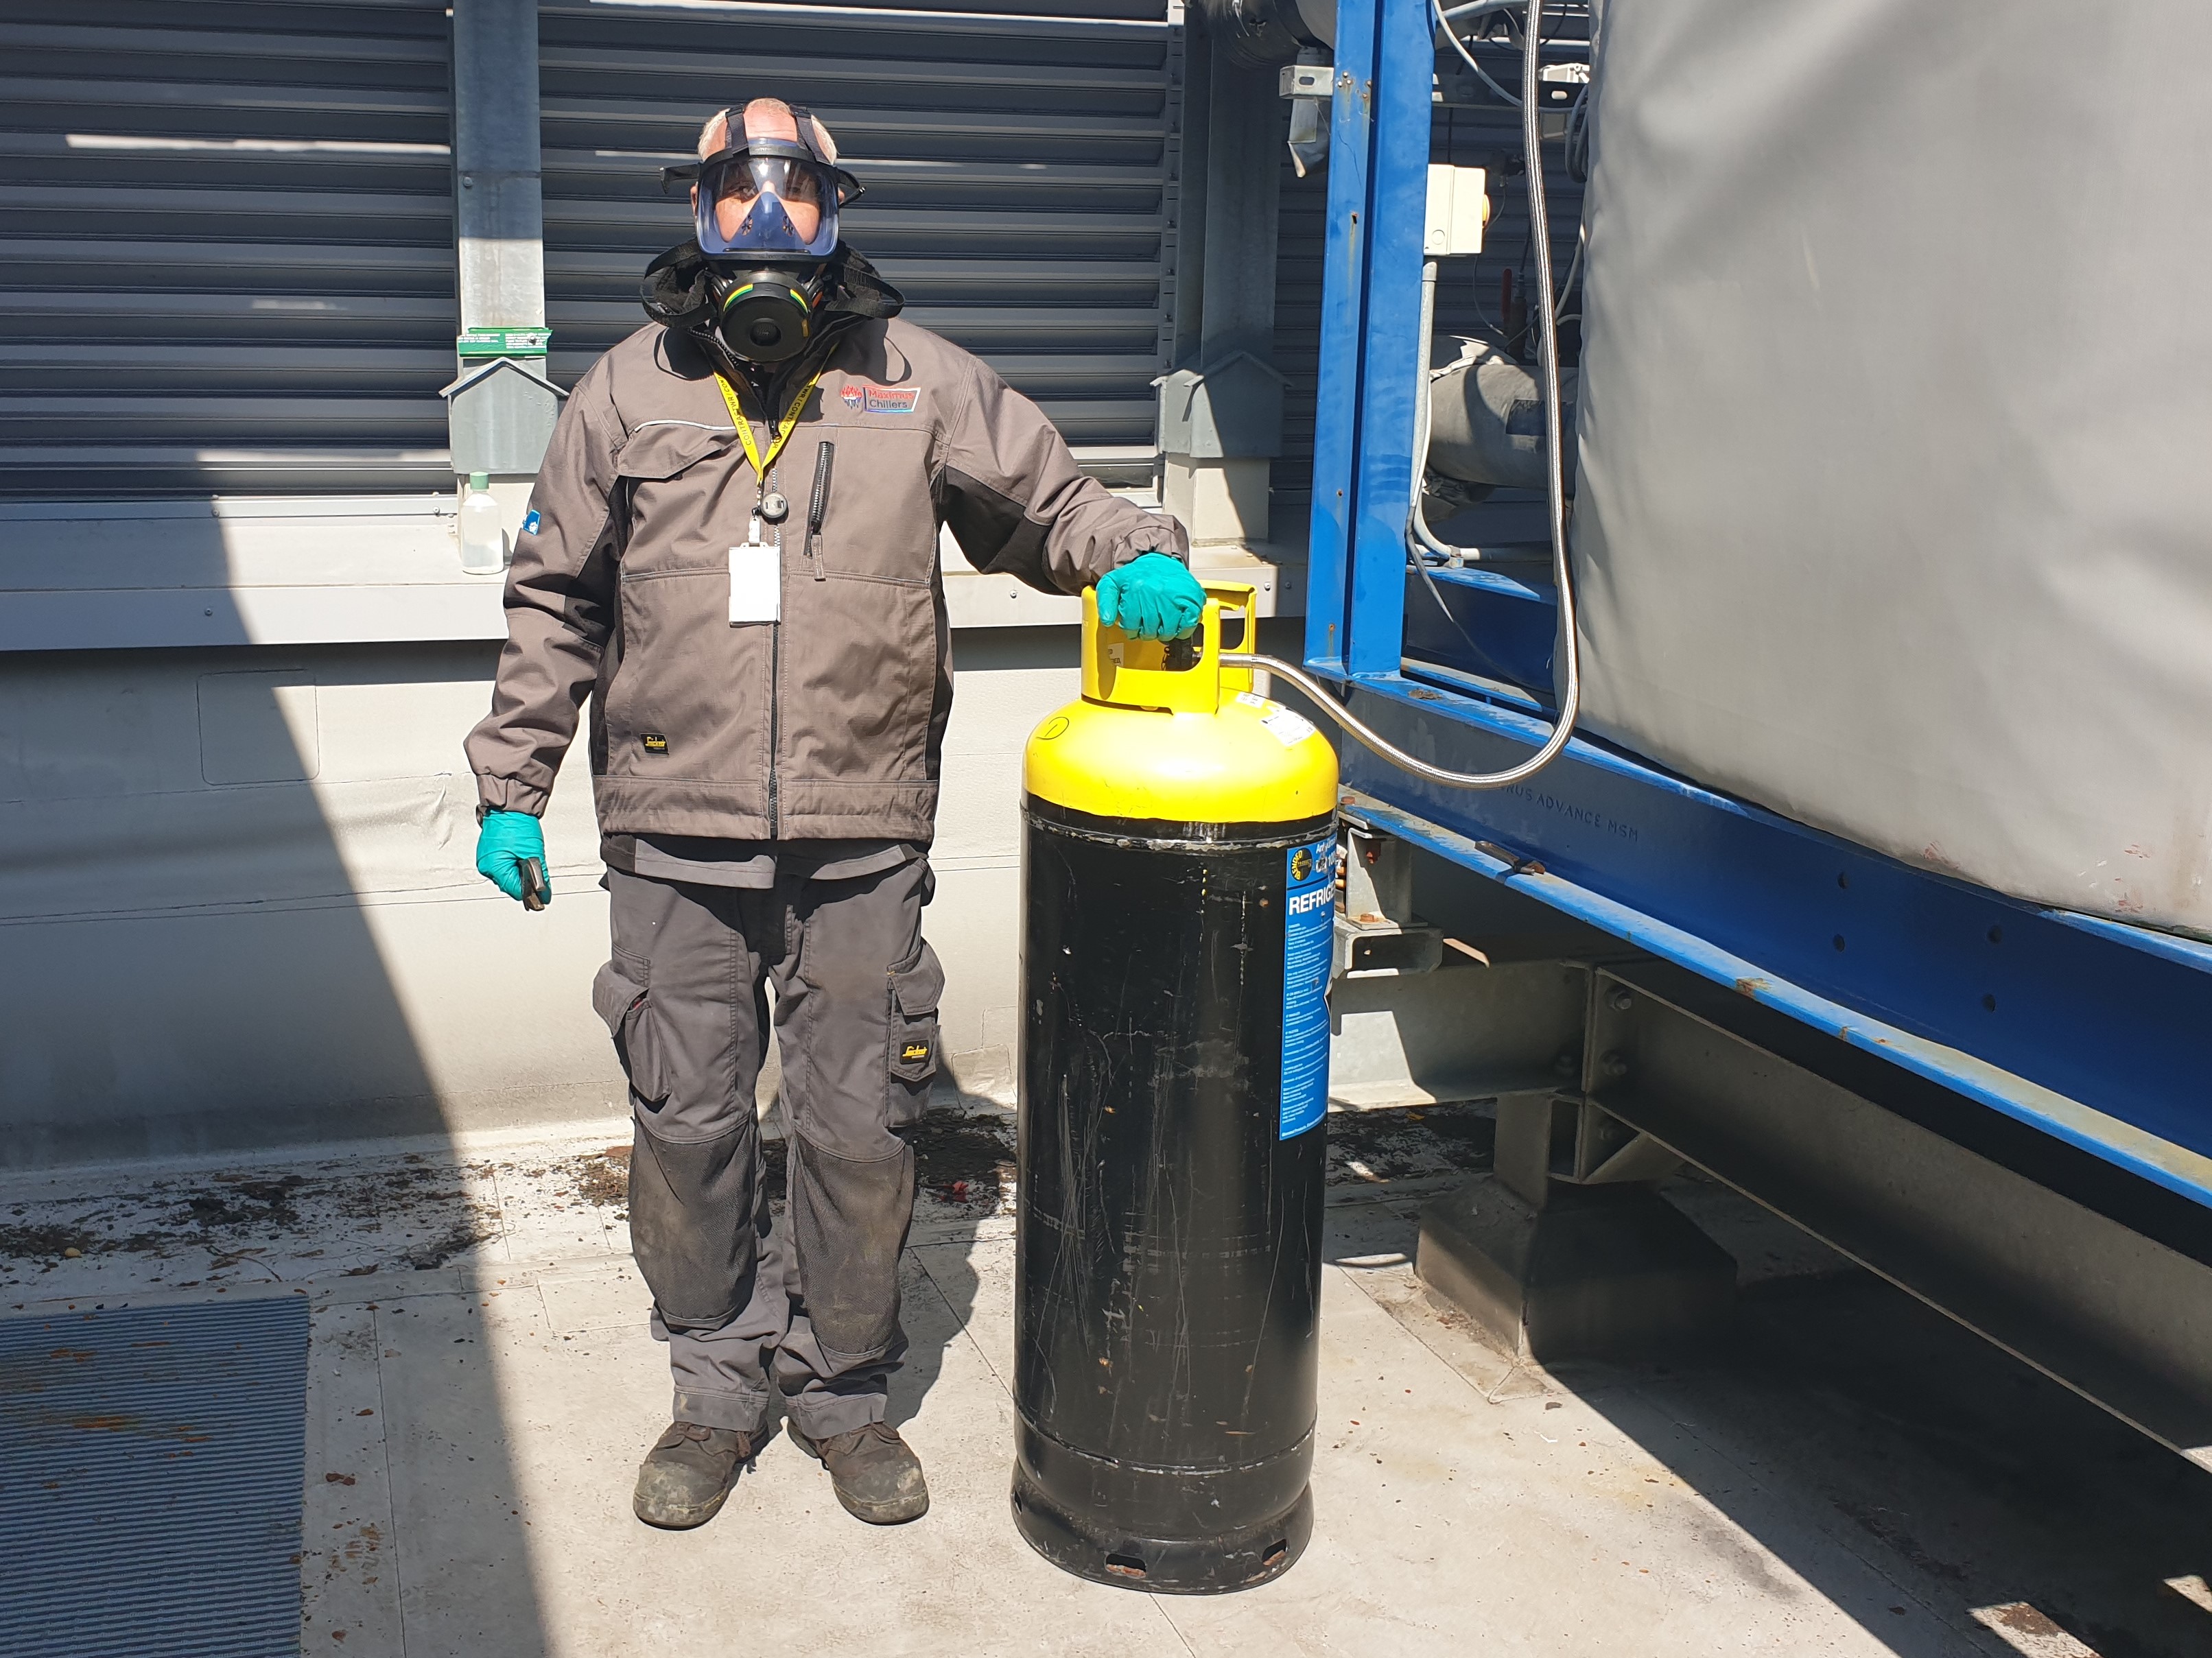 Industrial refrigeration ammonia being charged by an engineer wearing breathing apparatus and gloves